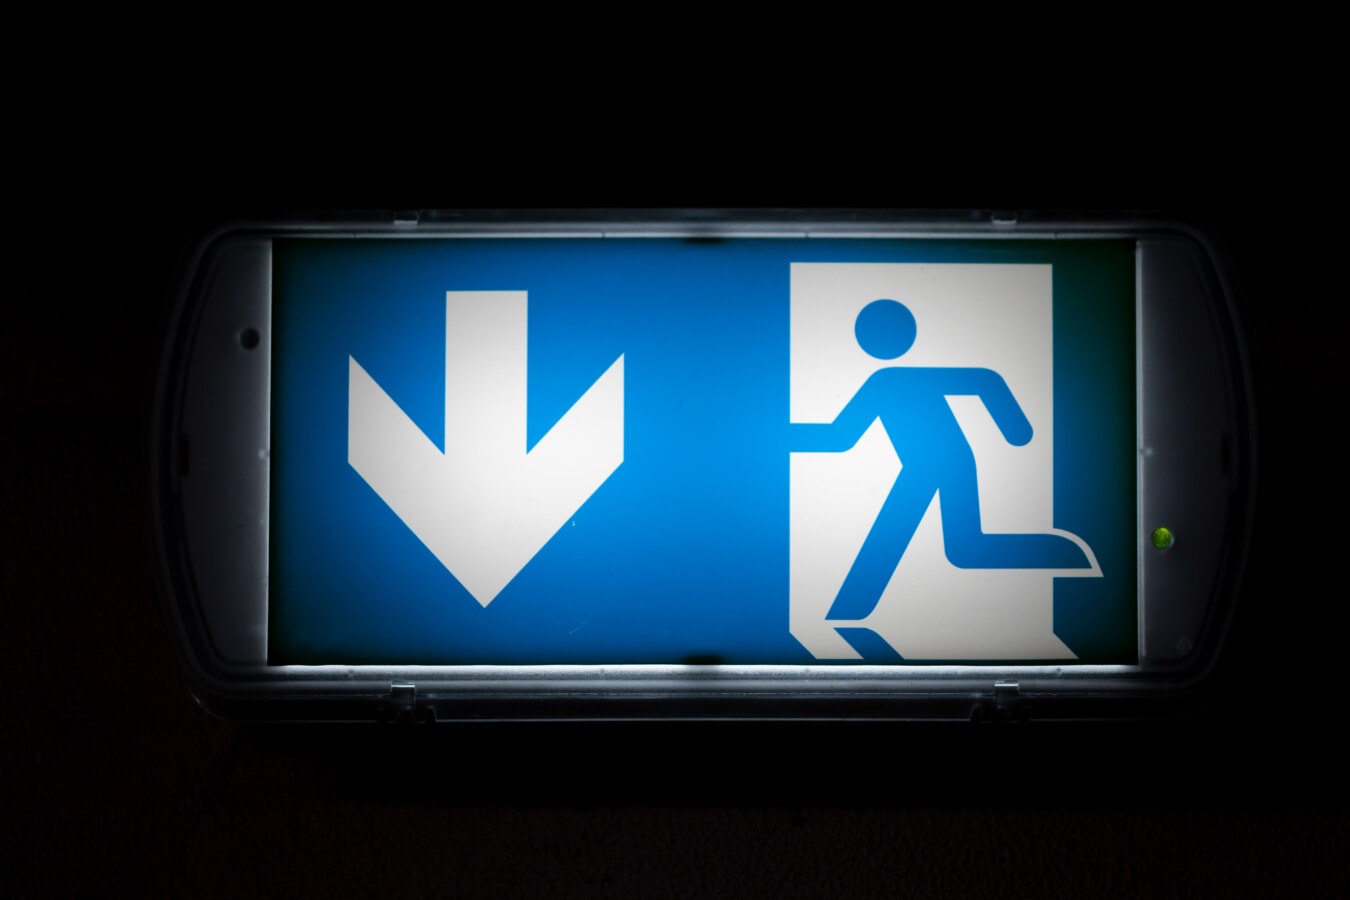 exit, emergency, signal, evacuation, sign, symbol, security, safety, information, display